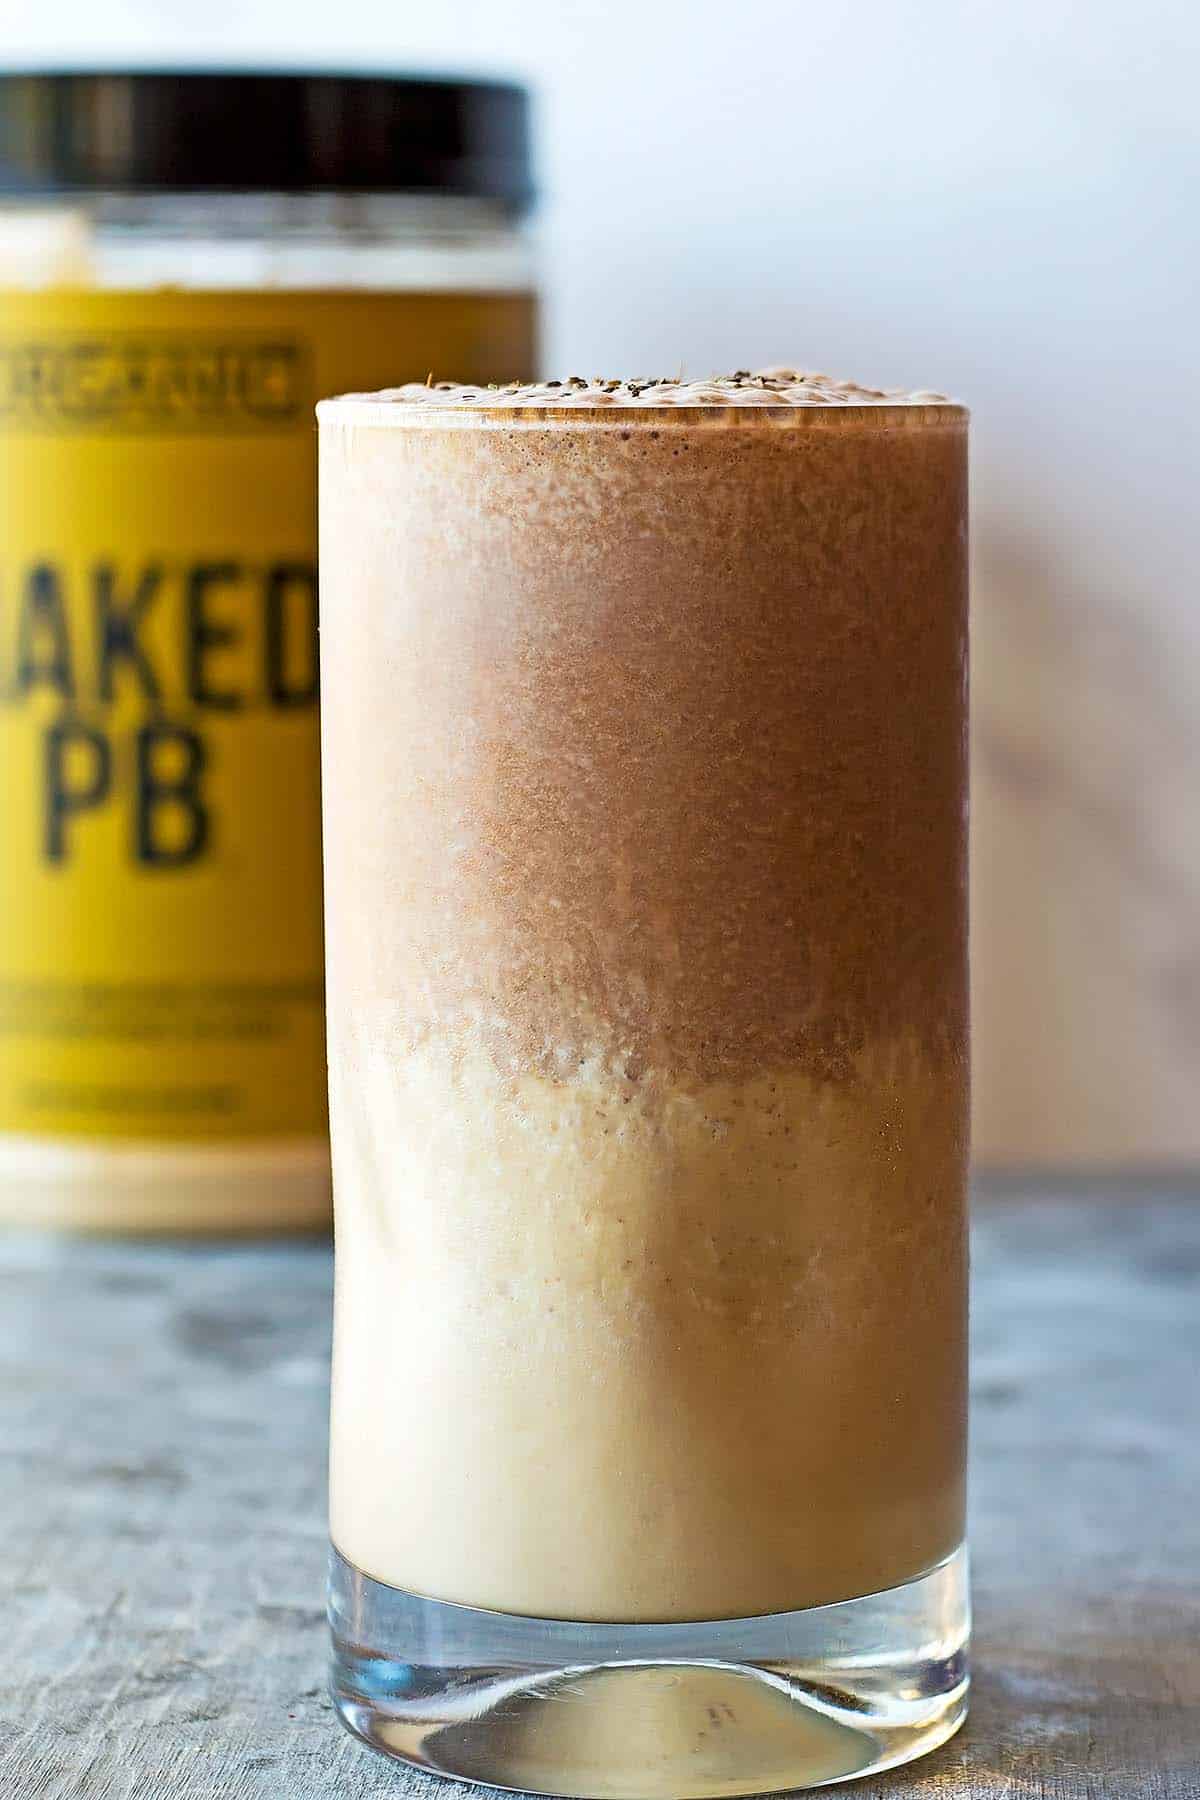 2 layered chocolate peanut butter protein shake in glass. peanut butter powder container in background